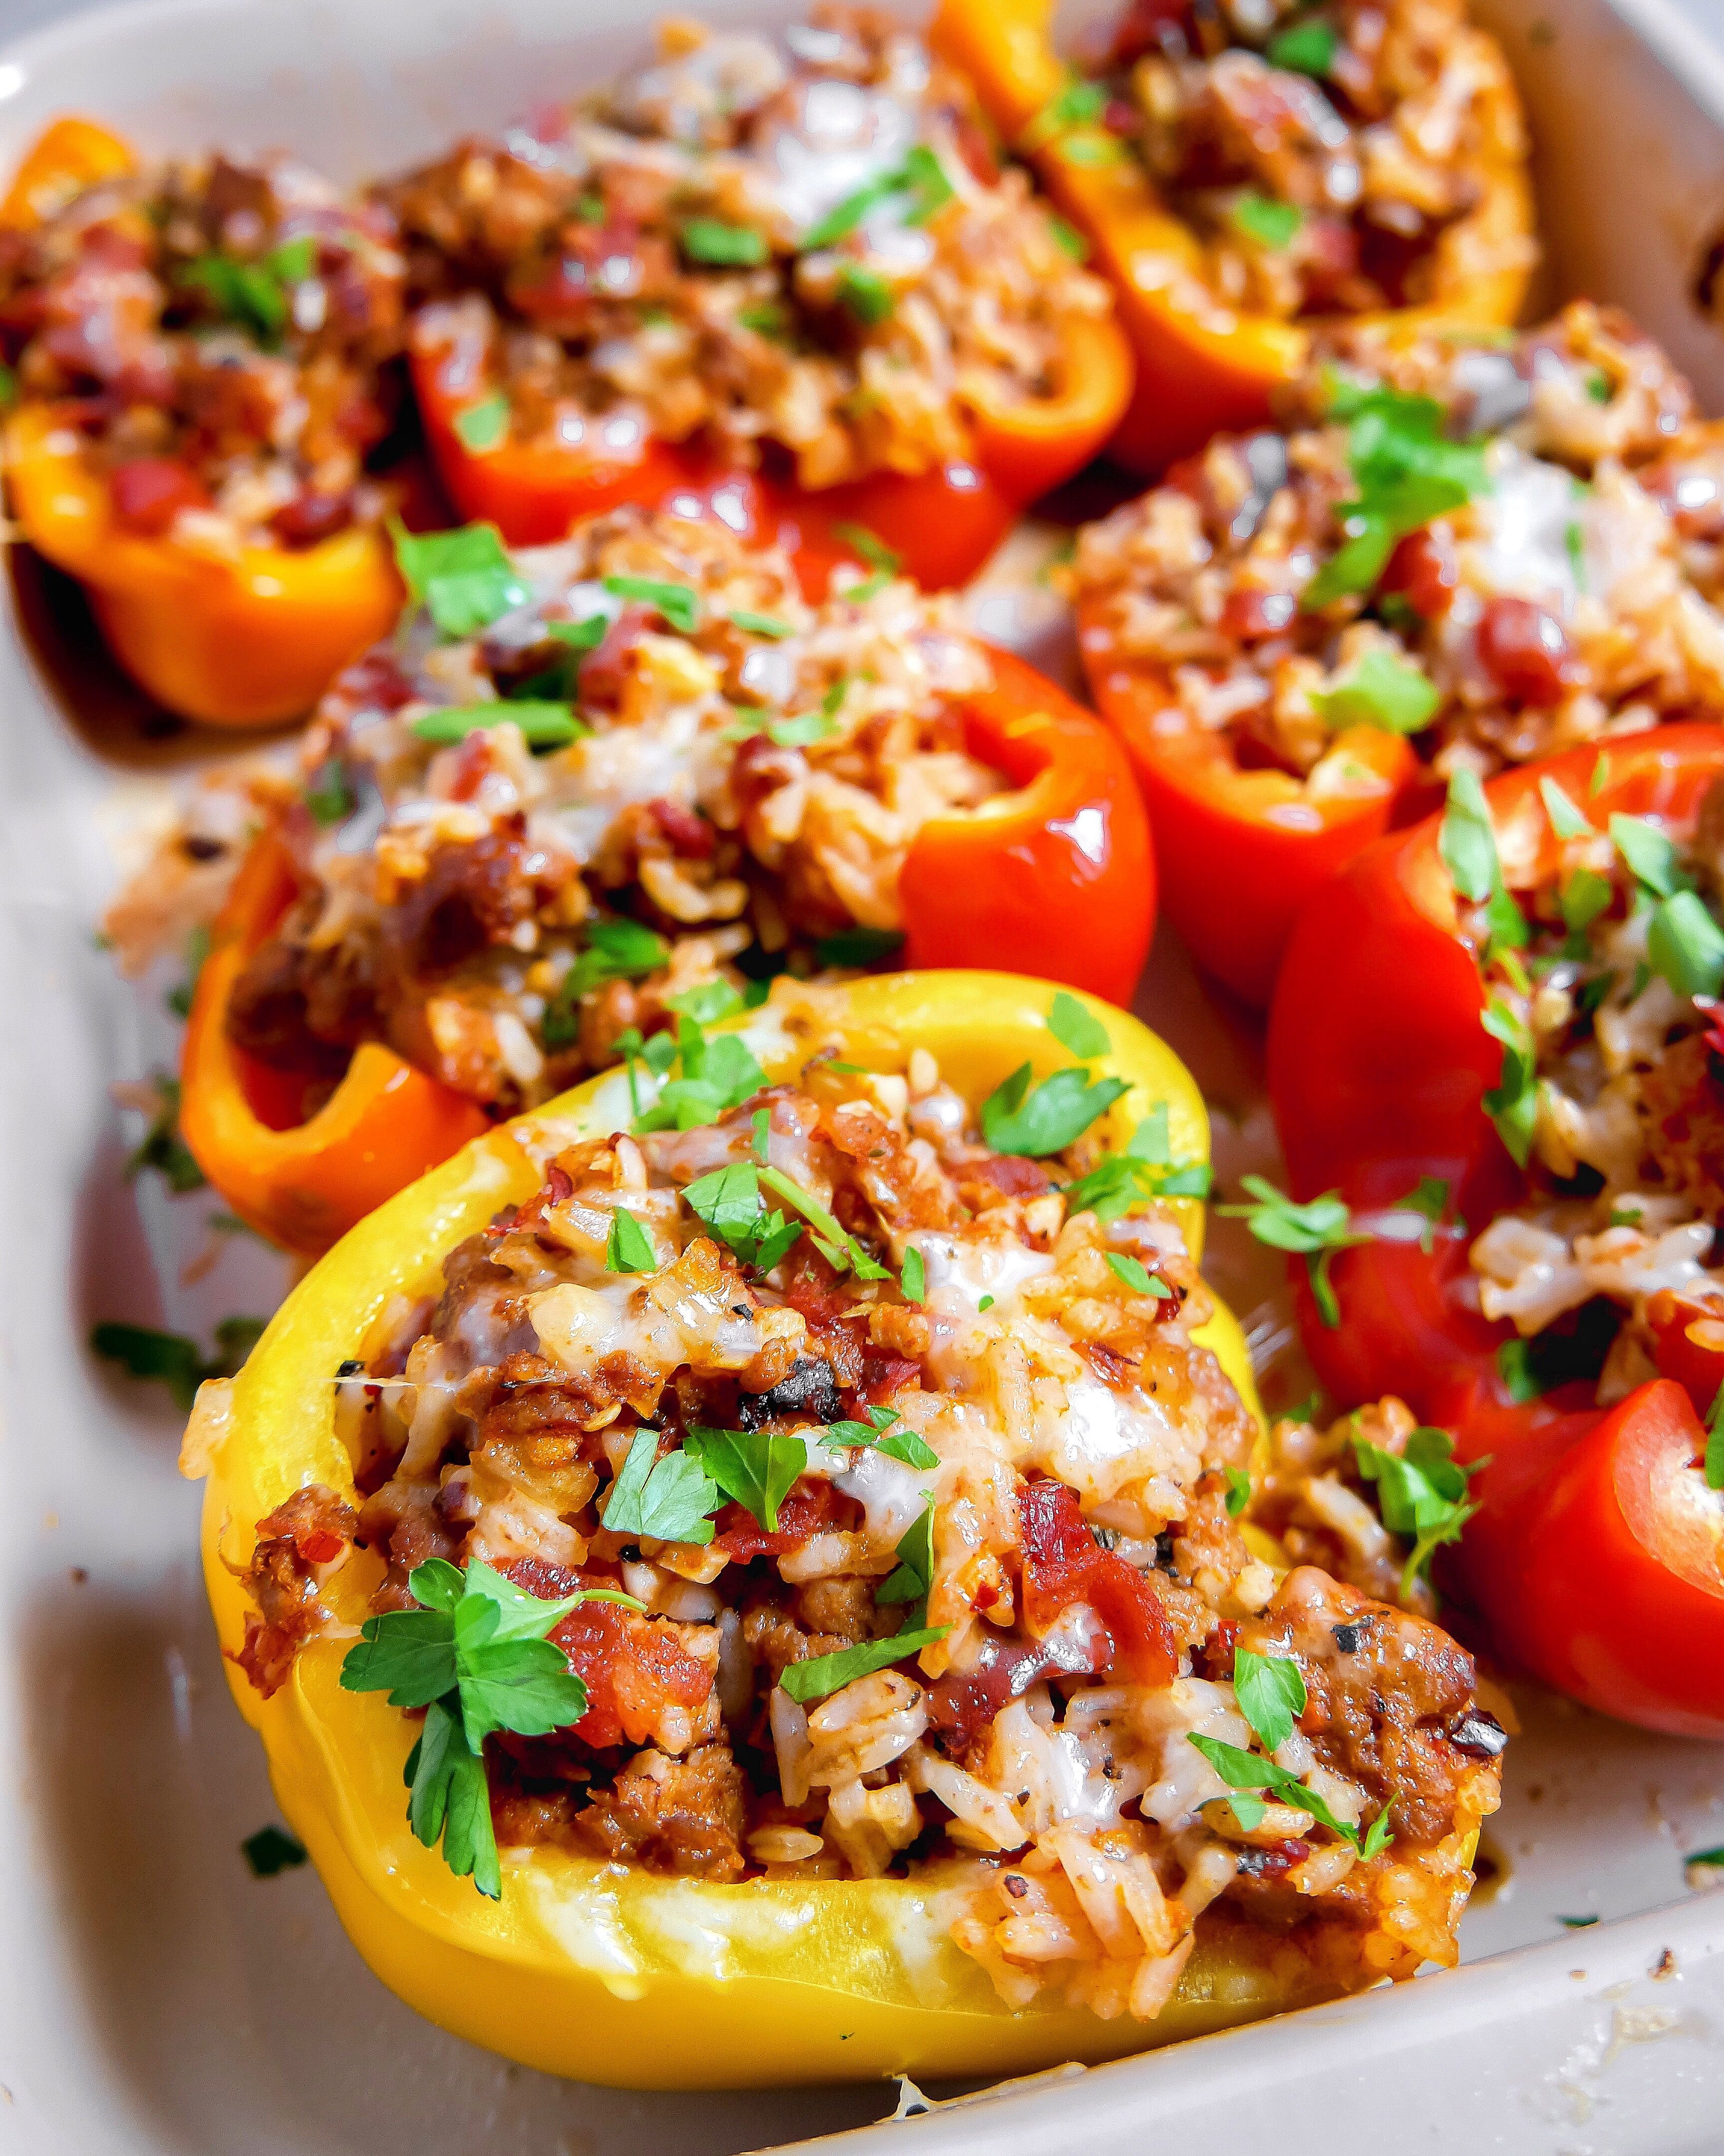 Hot Italian Sausage Stuffed Peppers Recipe By Stephanie The Feedfeed,What Temp To Cook Chicken Breast In Oven